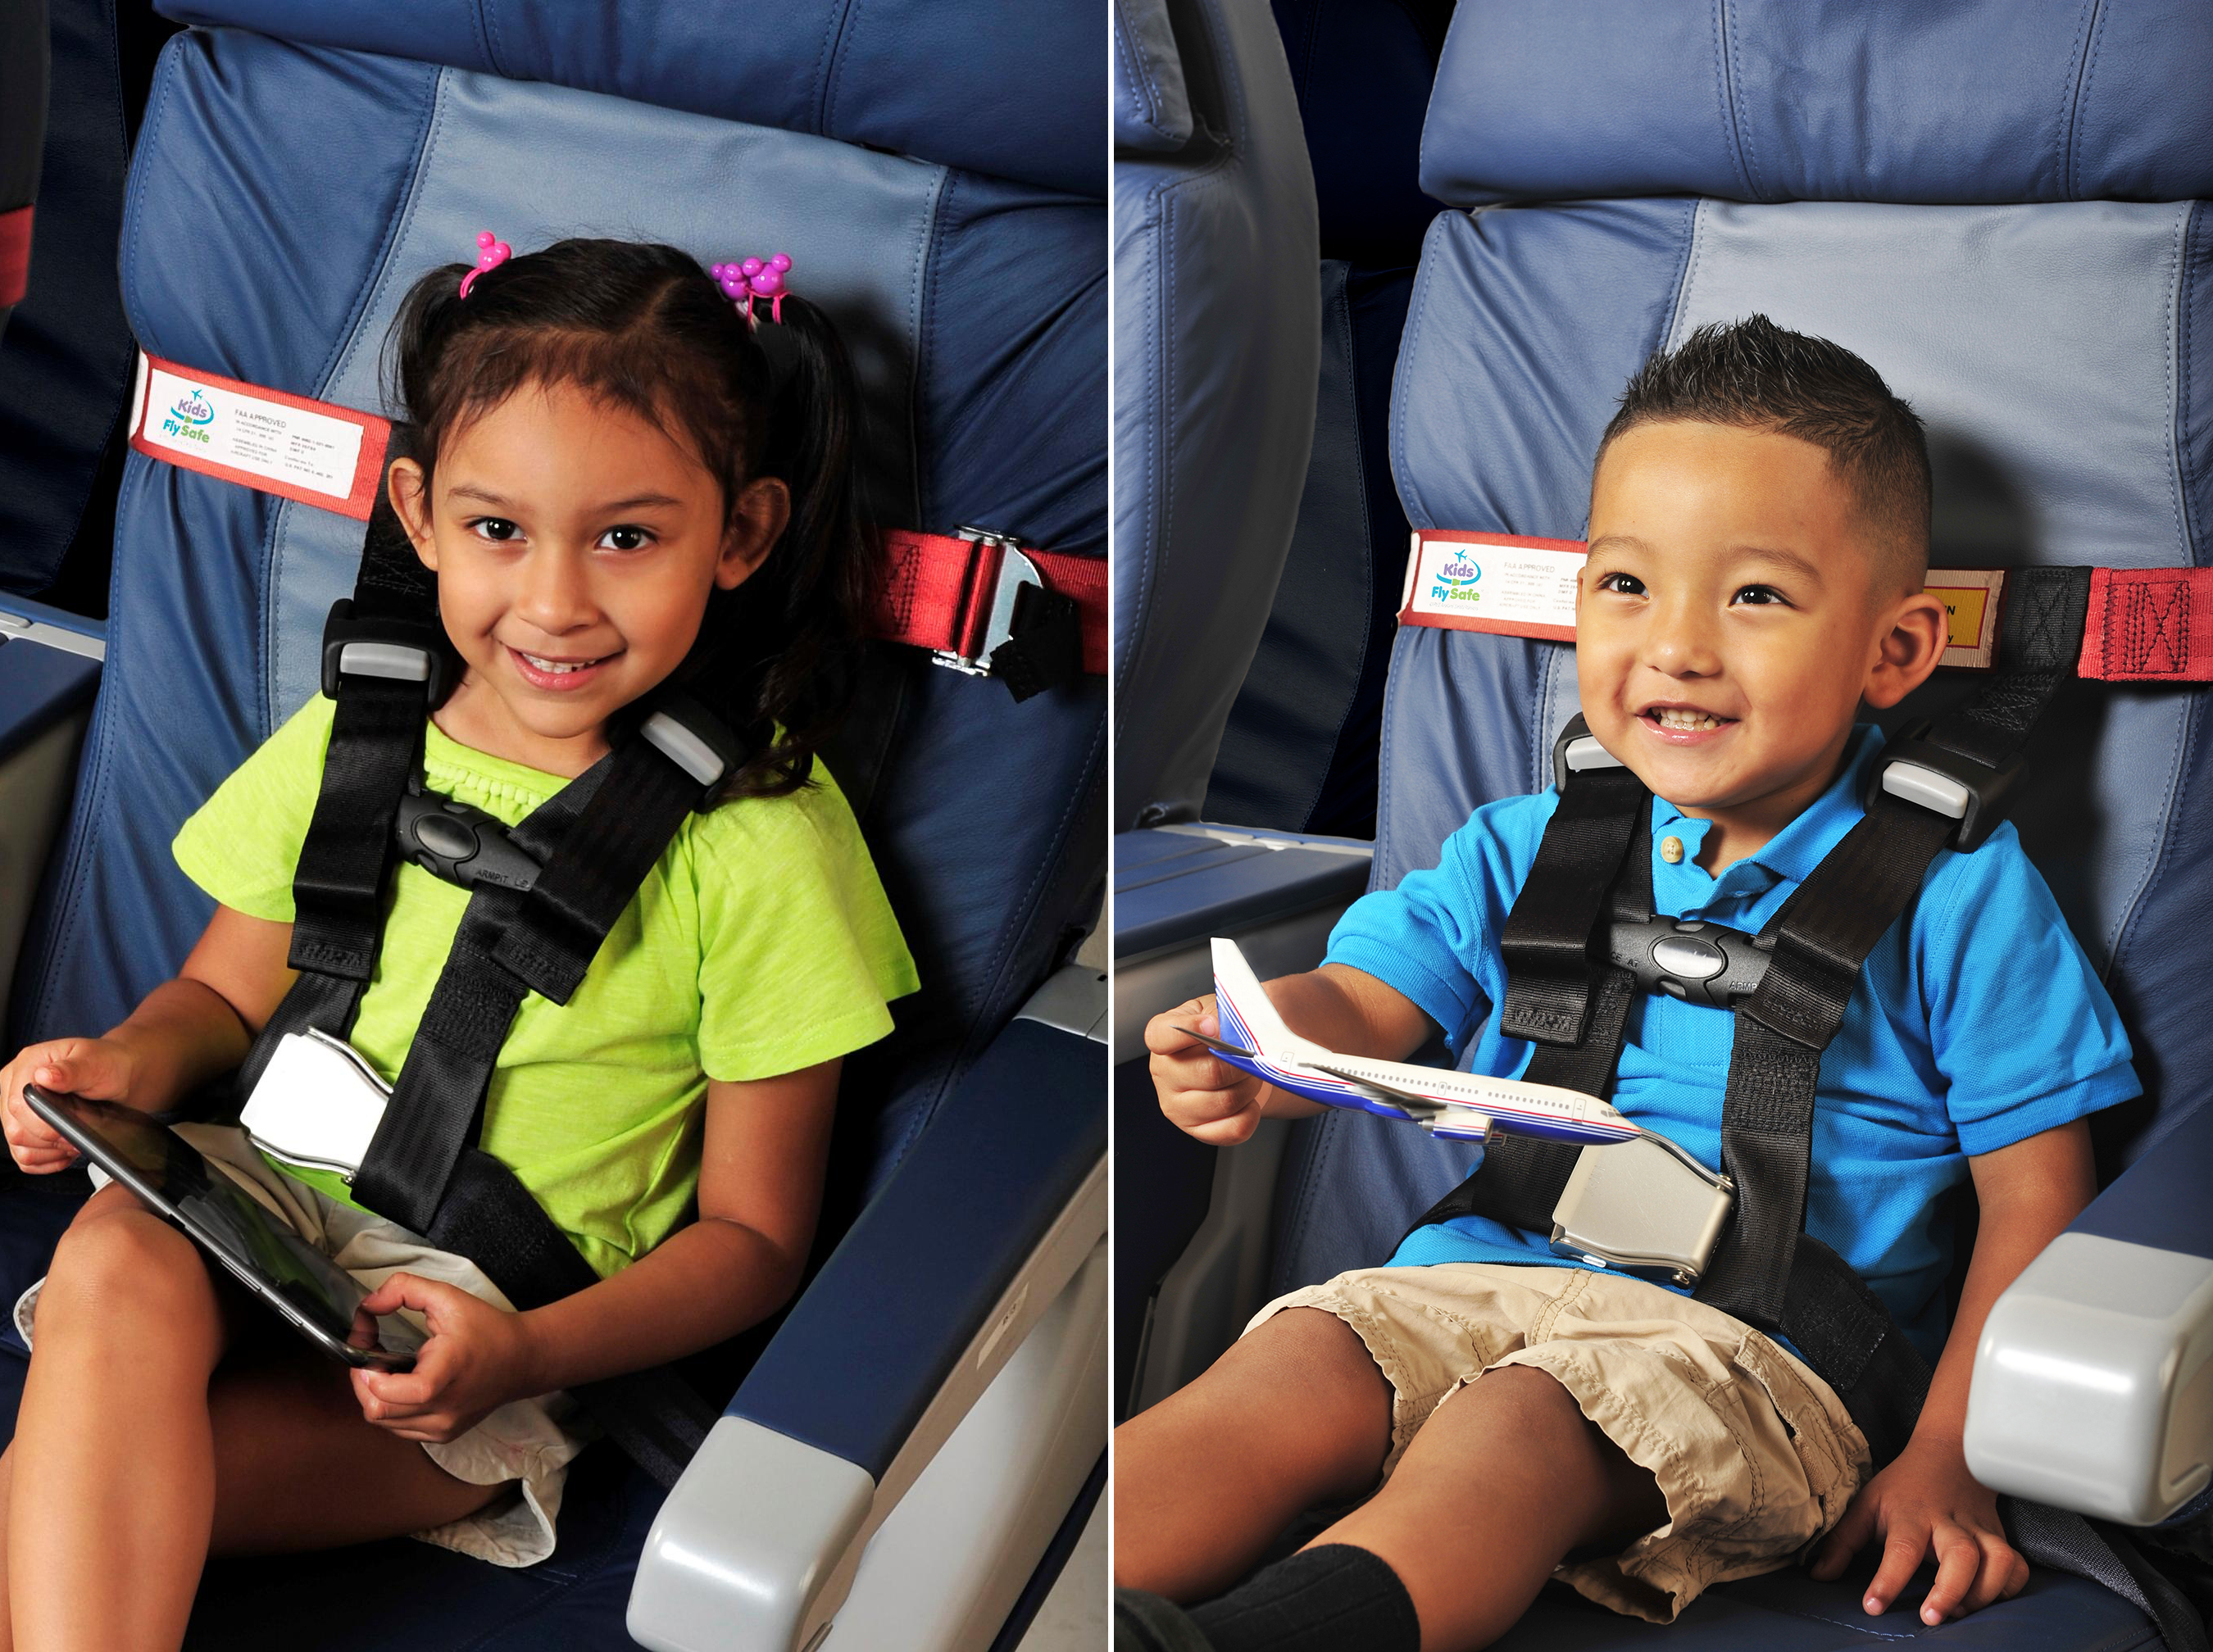 American Airlines Should Not Have Told Family They Couldn’t Use FAA-Approved Safety Harness